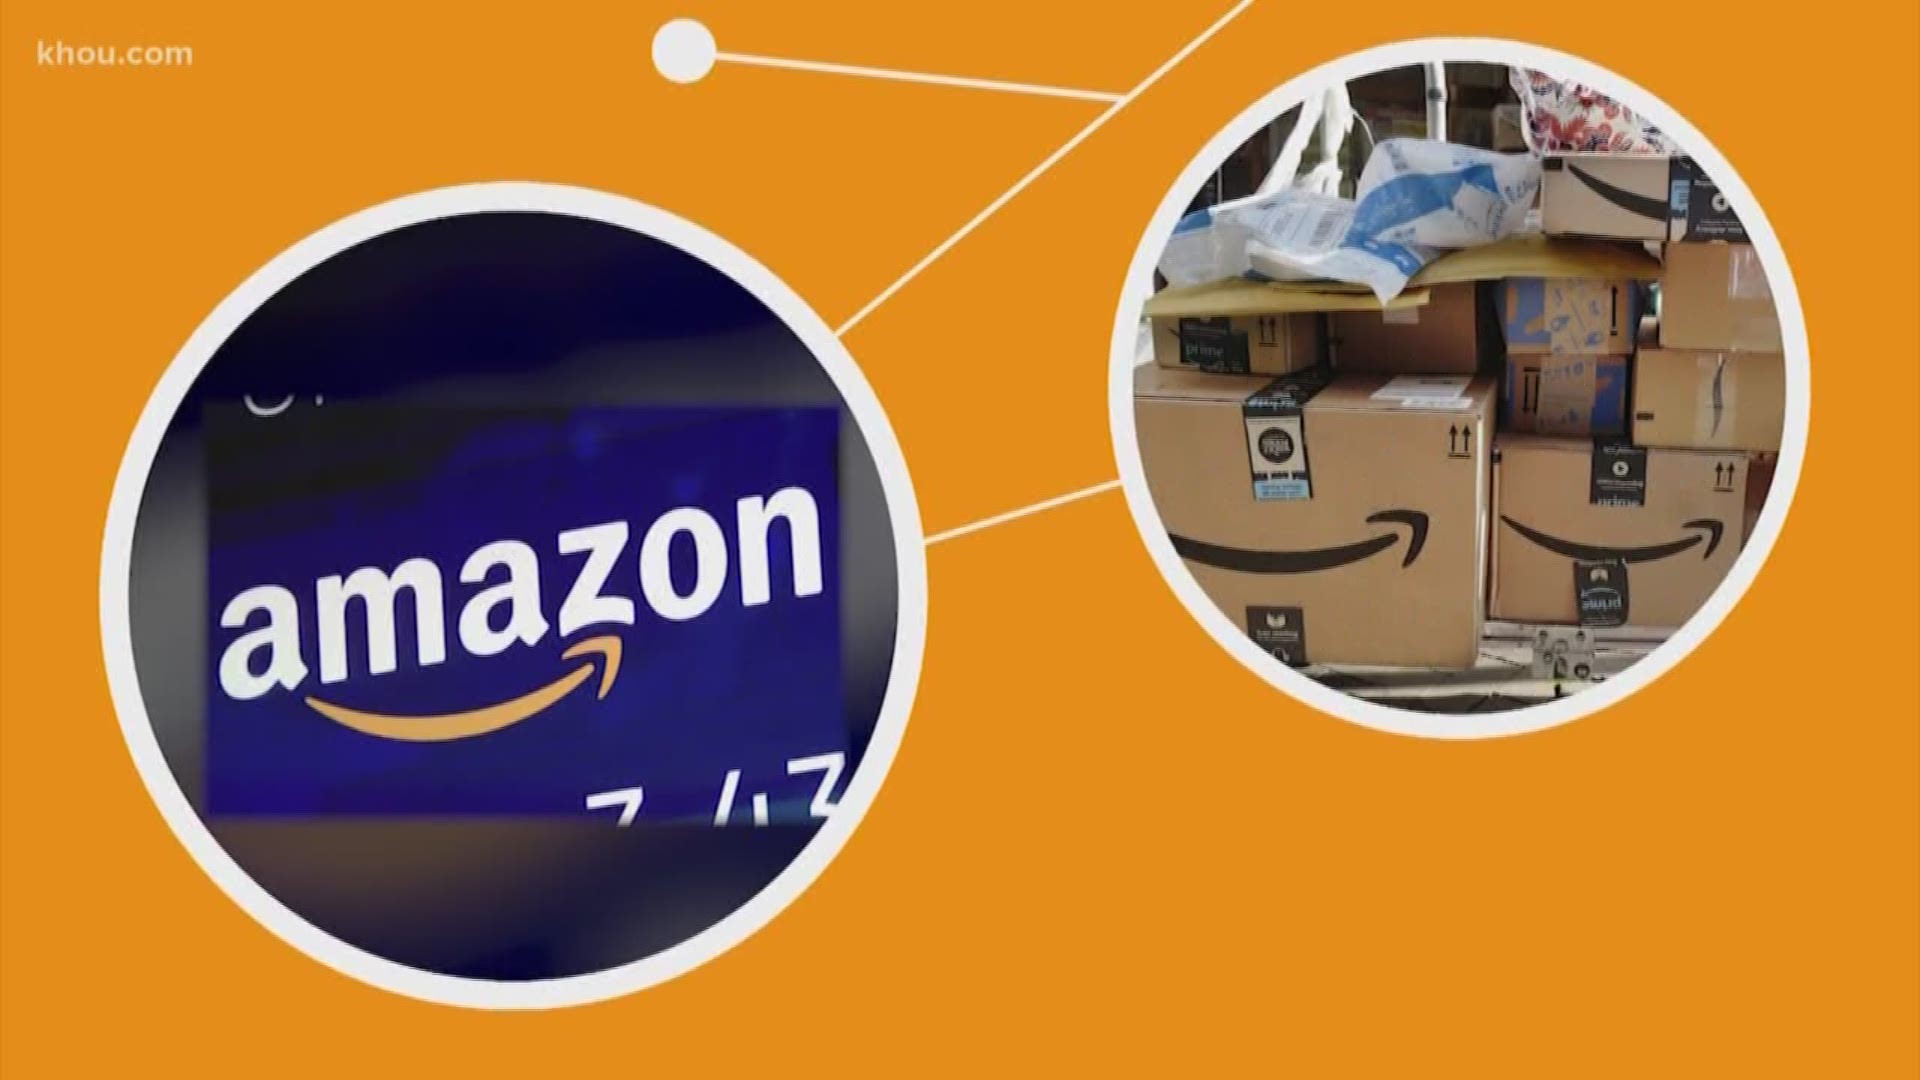 When it comes to online shopping, Amazon is pretty much king. But some major retailers are hoping to lure your business and it means more options for you.  Lauren Talarico connects the dots.